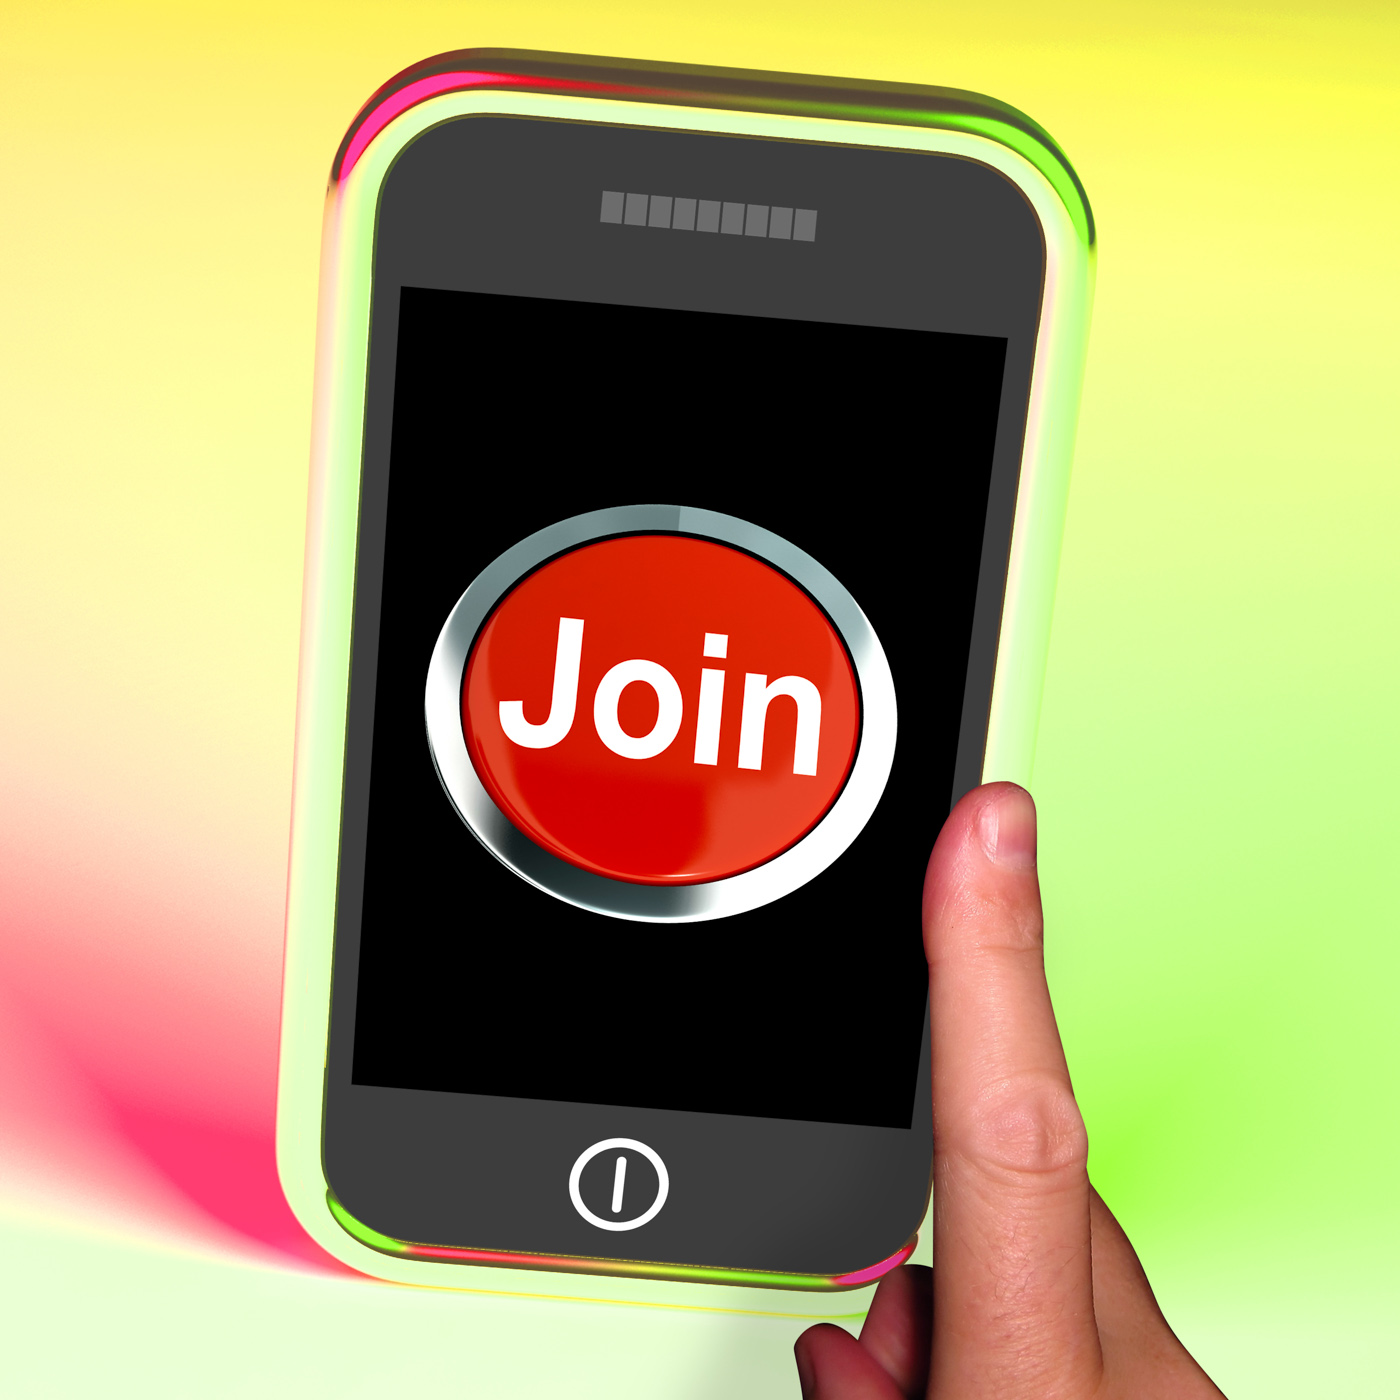 Join button on mobile shows subscription and registration photo